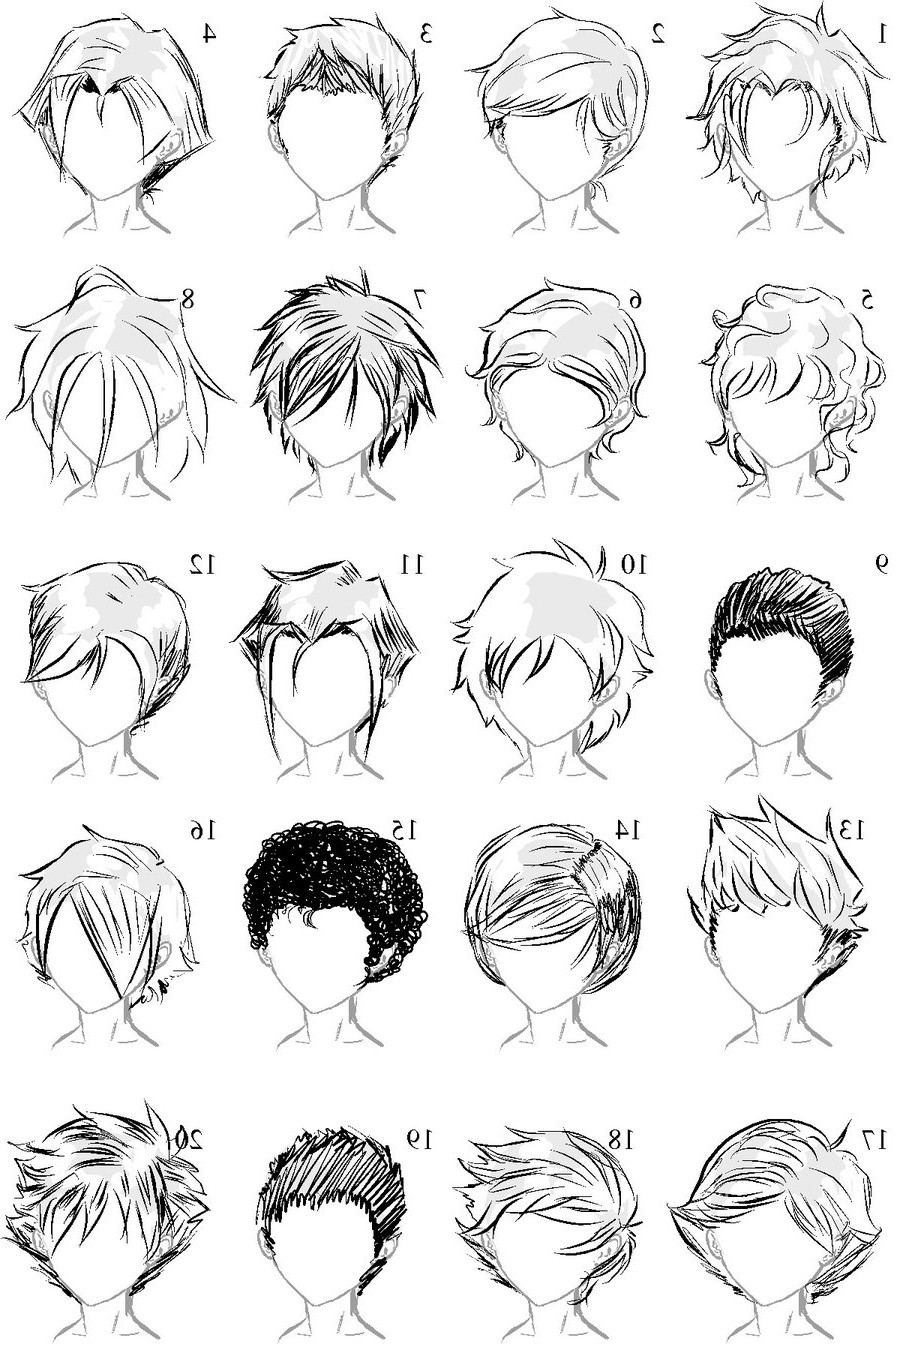 Anime Male Hairstyles
 Male Anime Hairstyles Drawing at PaintingValley